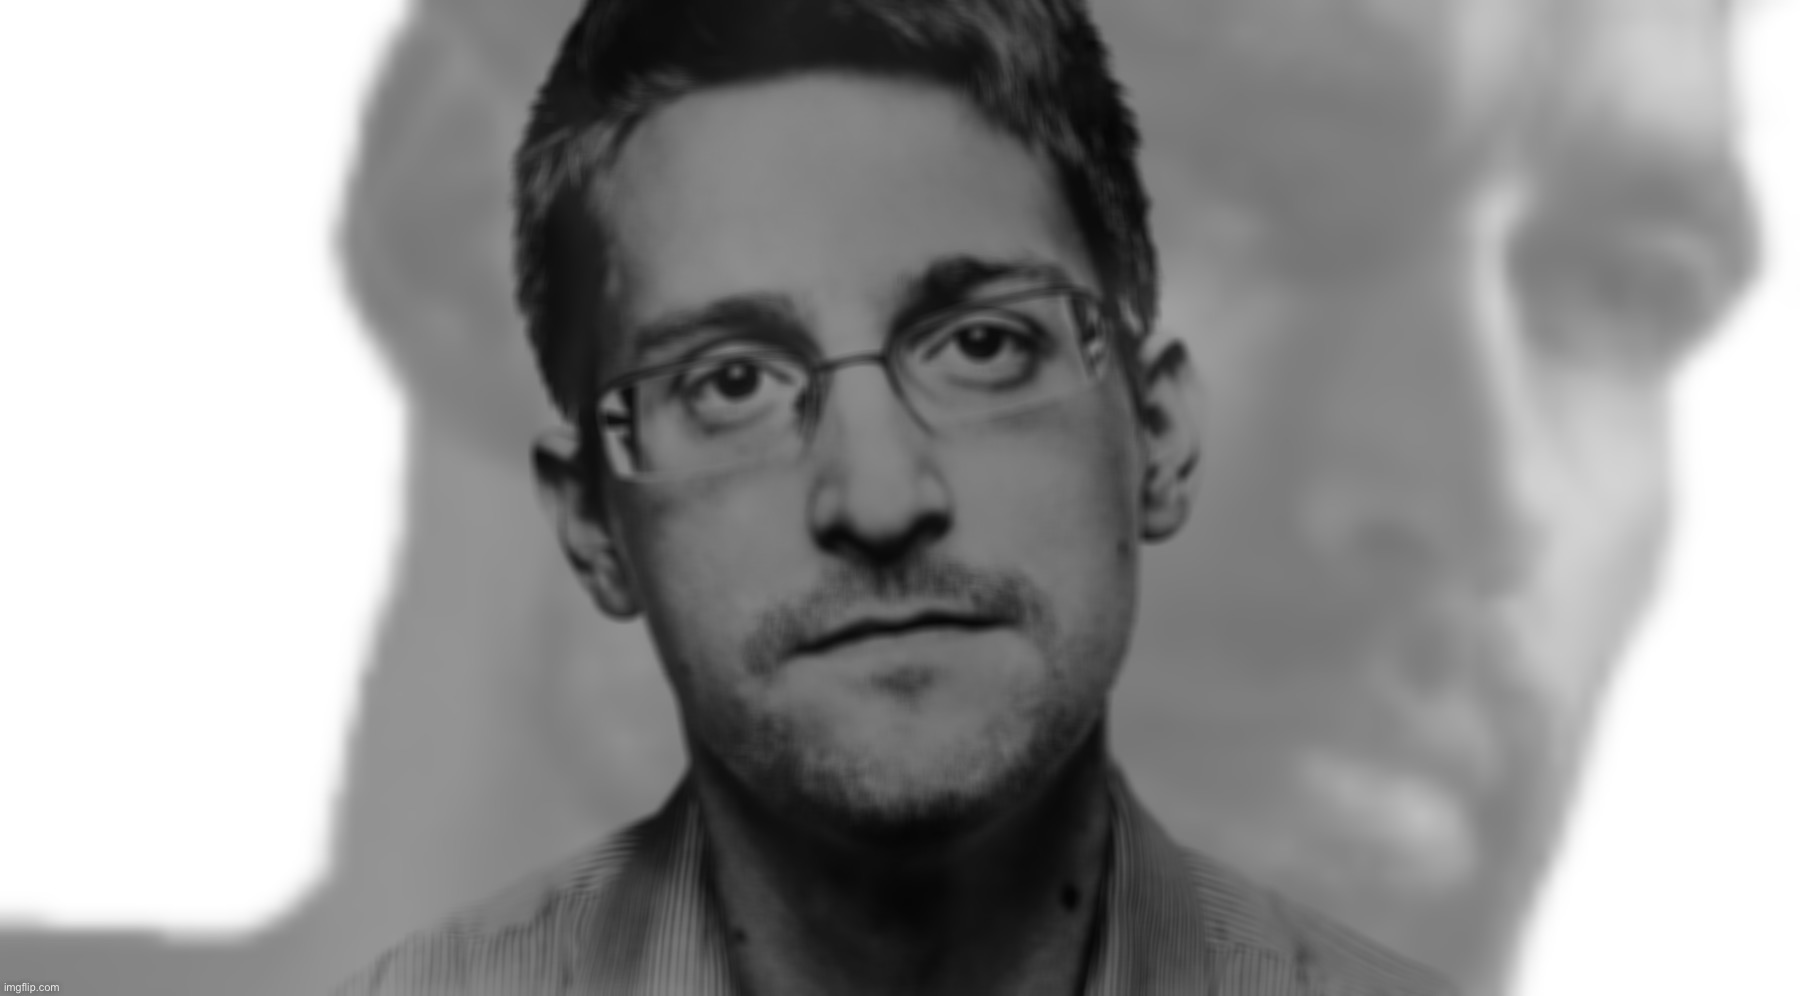 Snowden the Giga Chad | image tagged in edward snowden giga chad confirmed,edward snowden,the,giga chad,confirmed,snowden | made w/ Imgflip meme maker